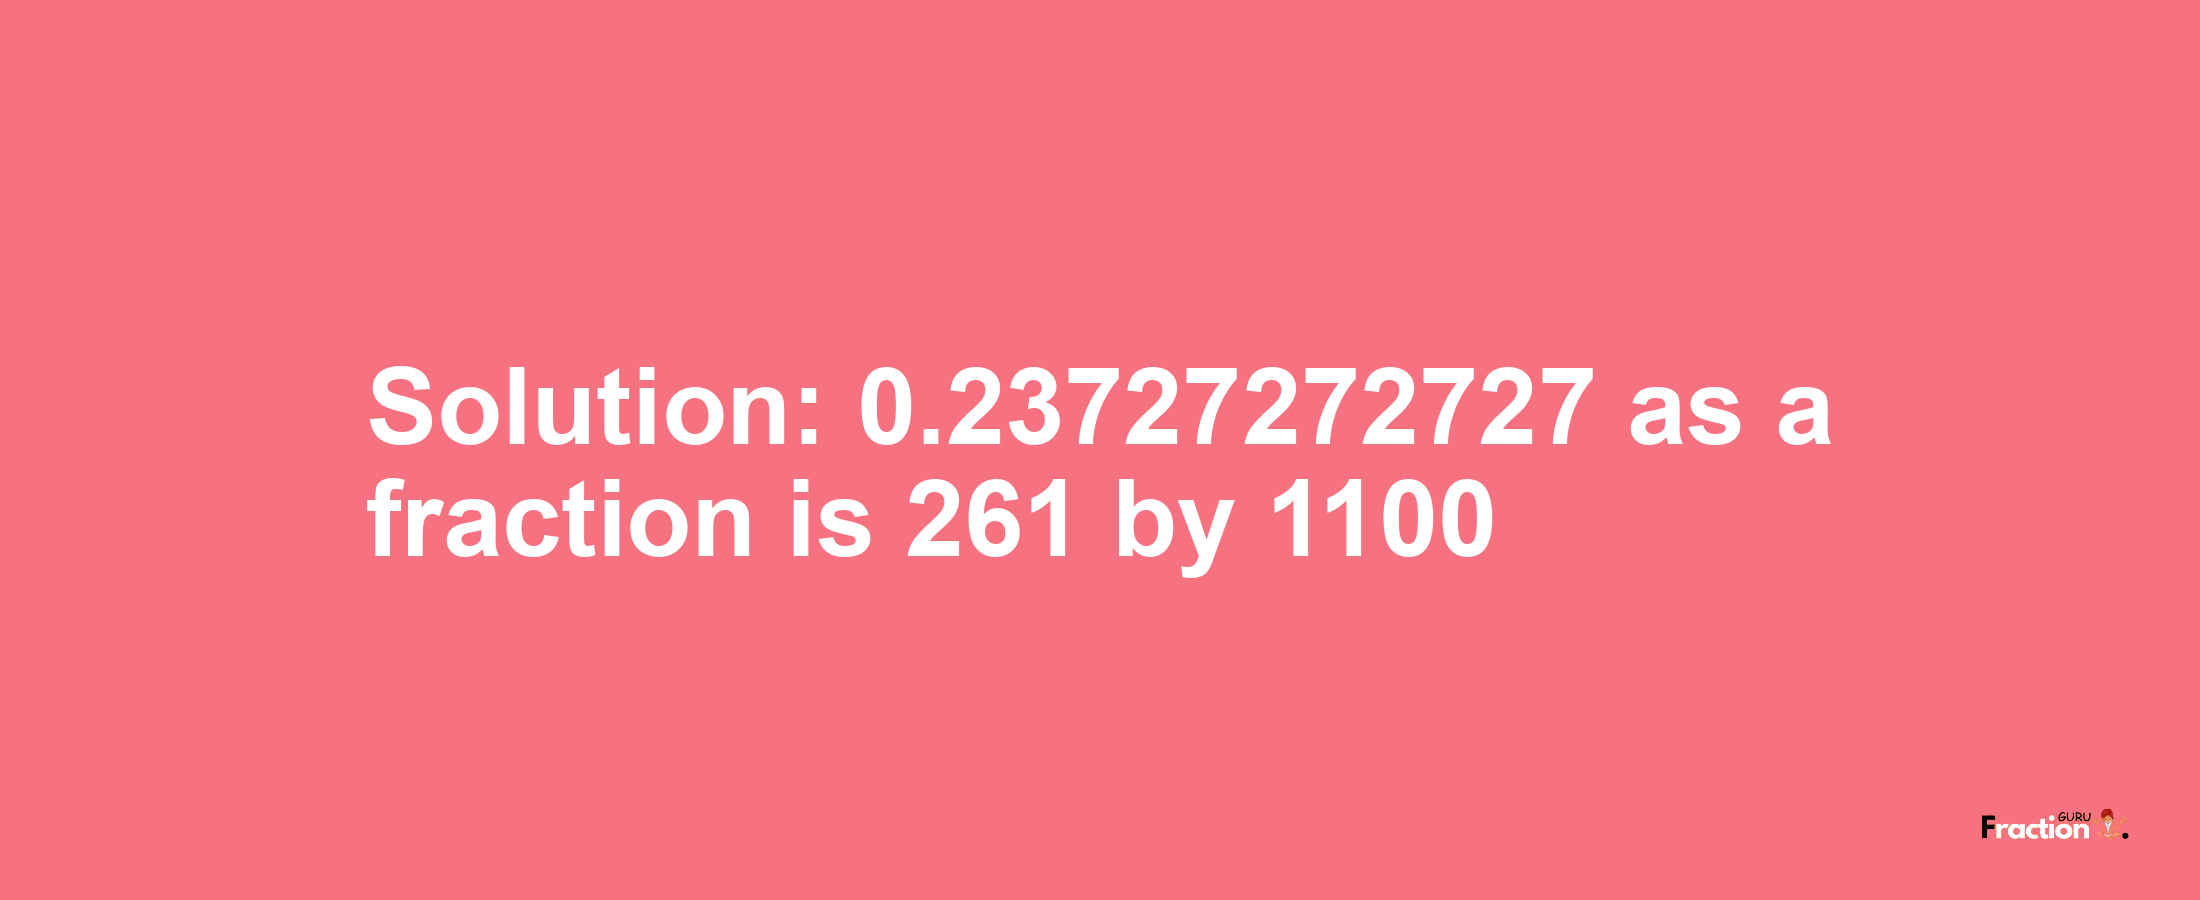 Solution:0.23727272727 as a fraction is 261/1100